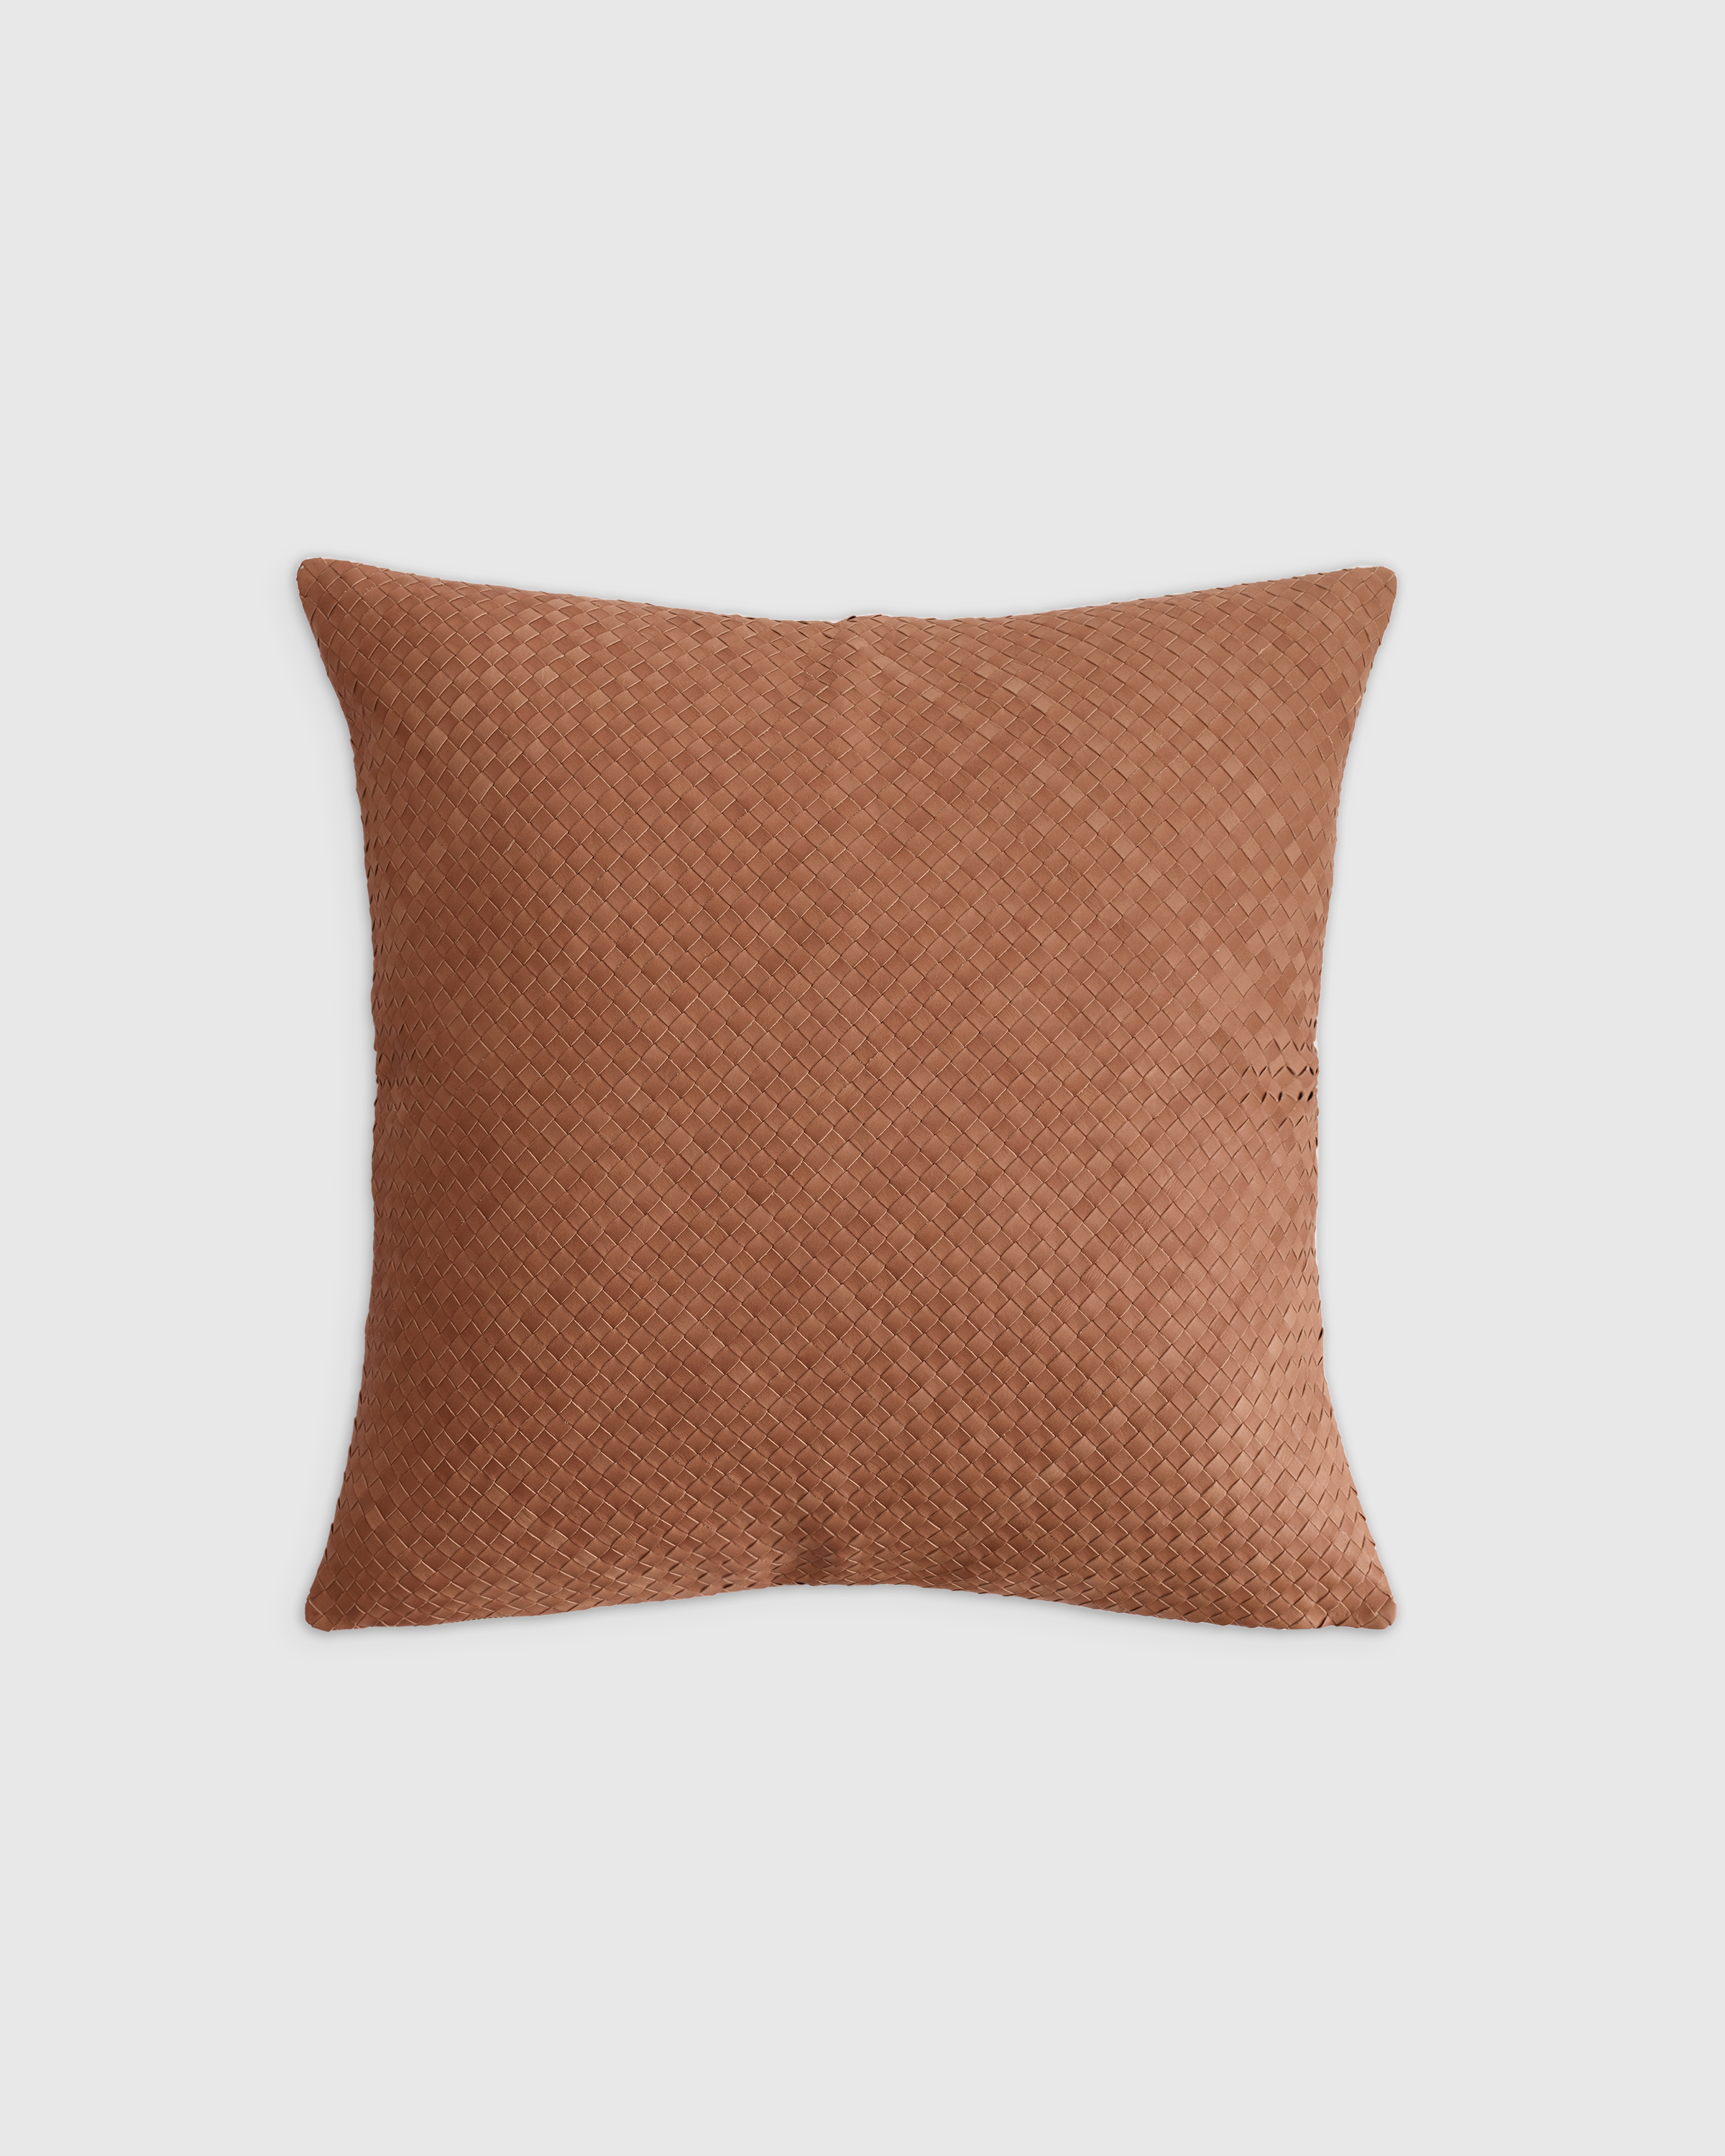 Quince Woven Leather Pillow Cover In Chestnut